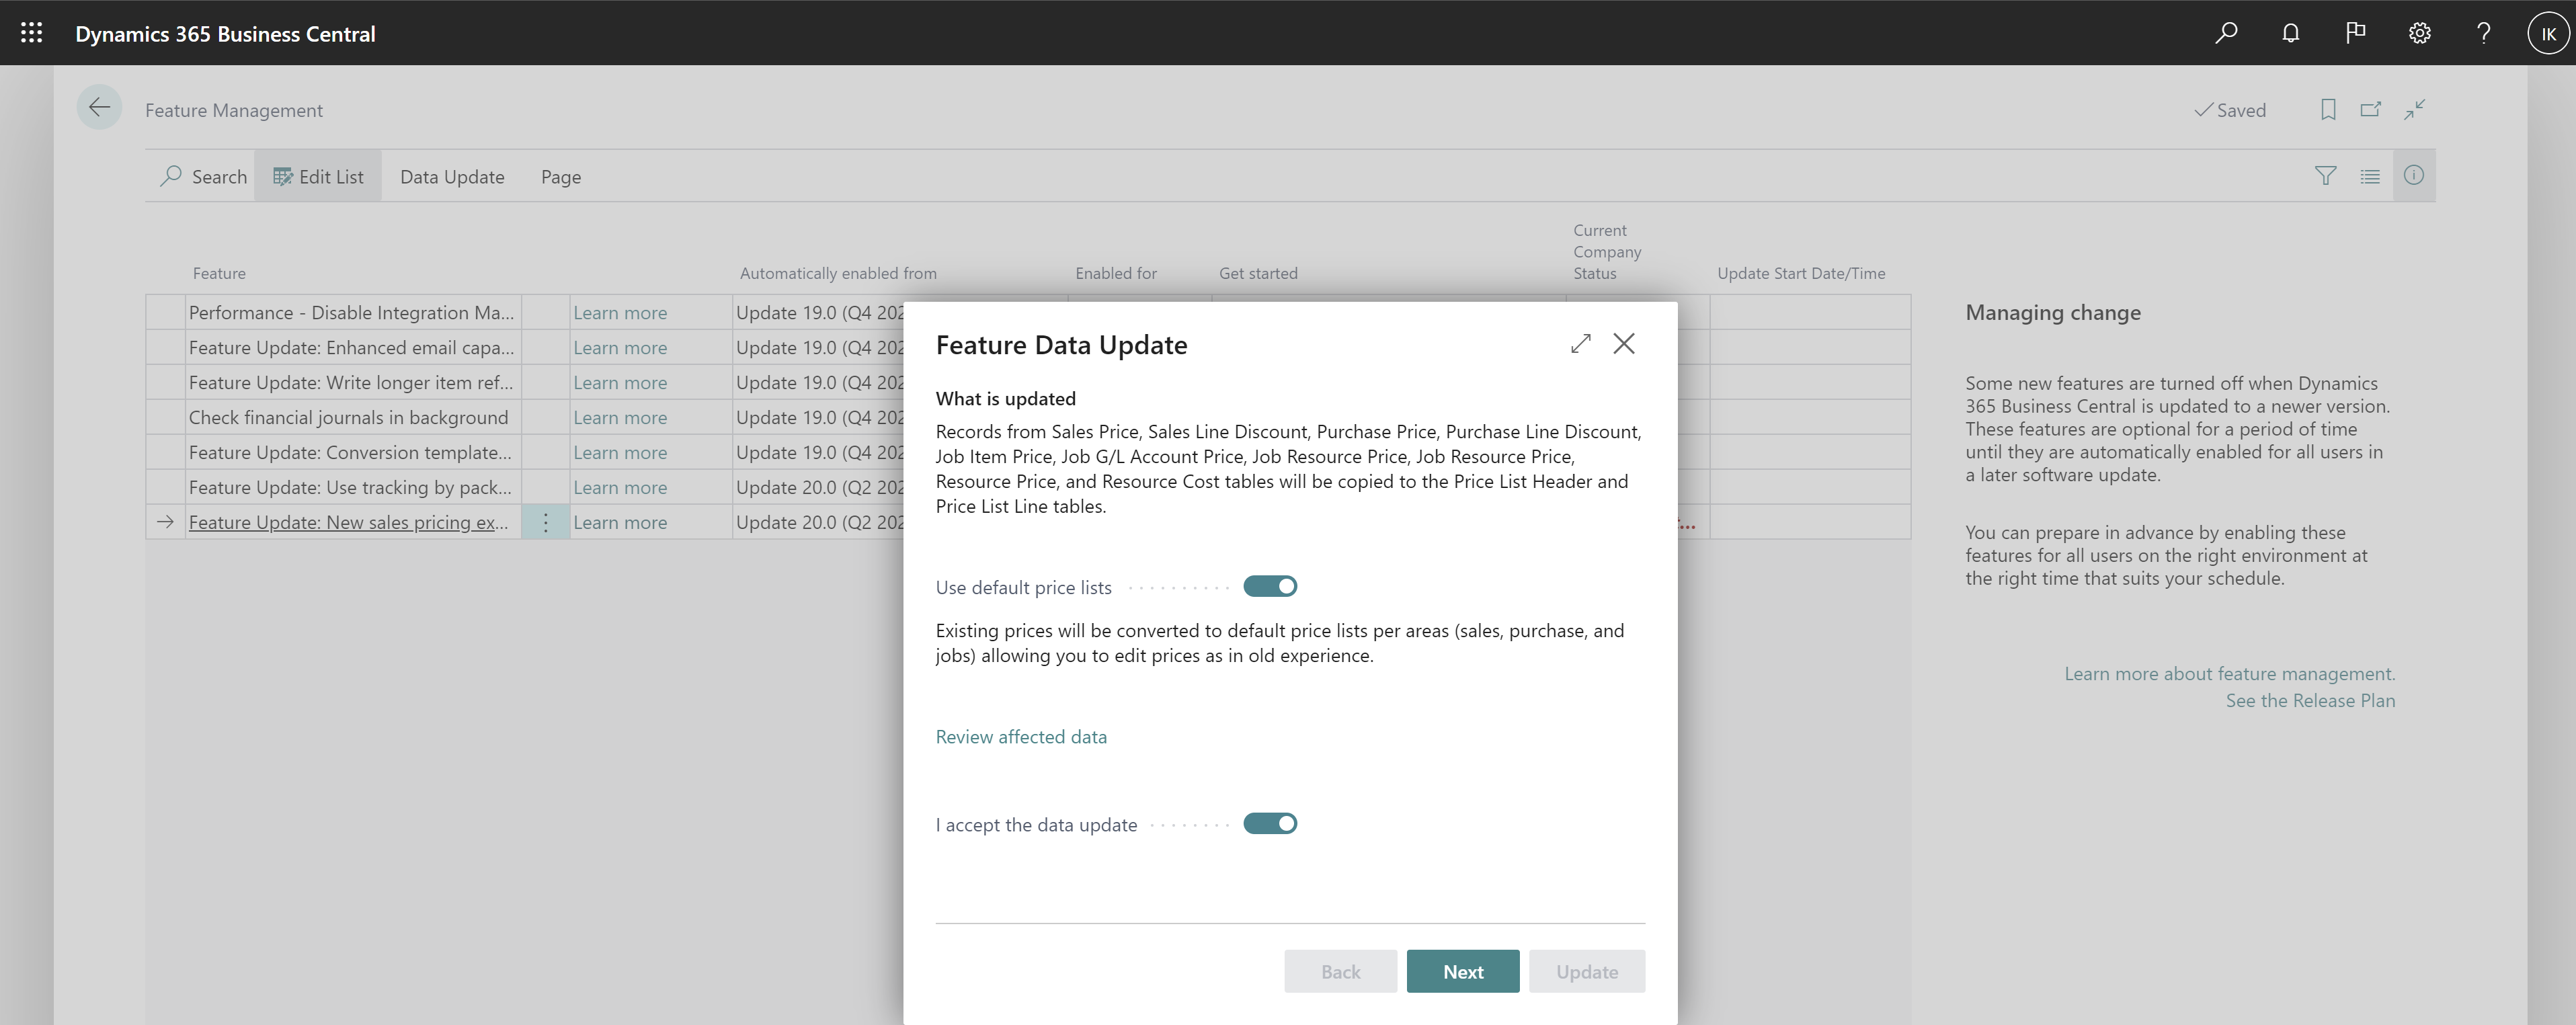 Shows Feature Data Update guide for new pricing experience with Use default price lists toggle